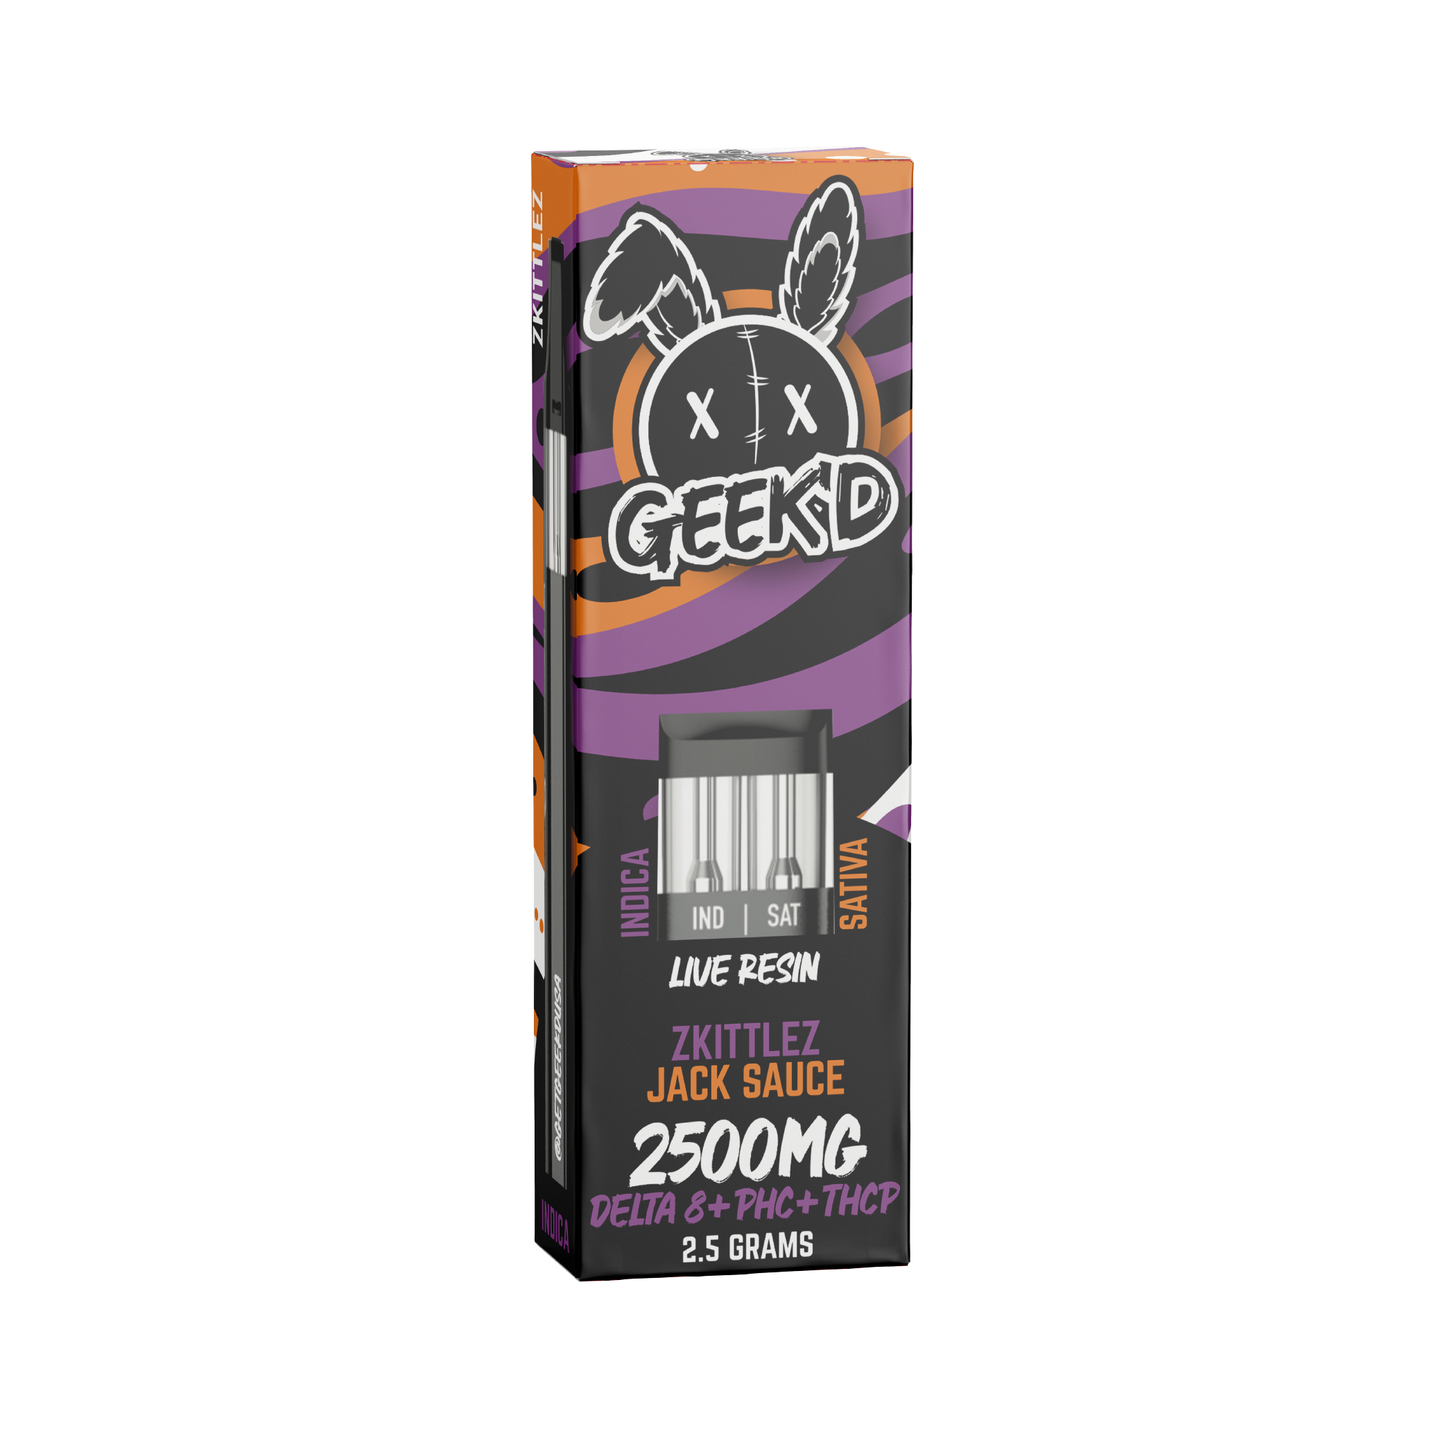 Zkittlez & Jack Sauce Live Resin Delta 8 + PHC + THC-P 2.5g Disposable by Geek'd Extracts